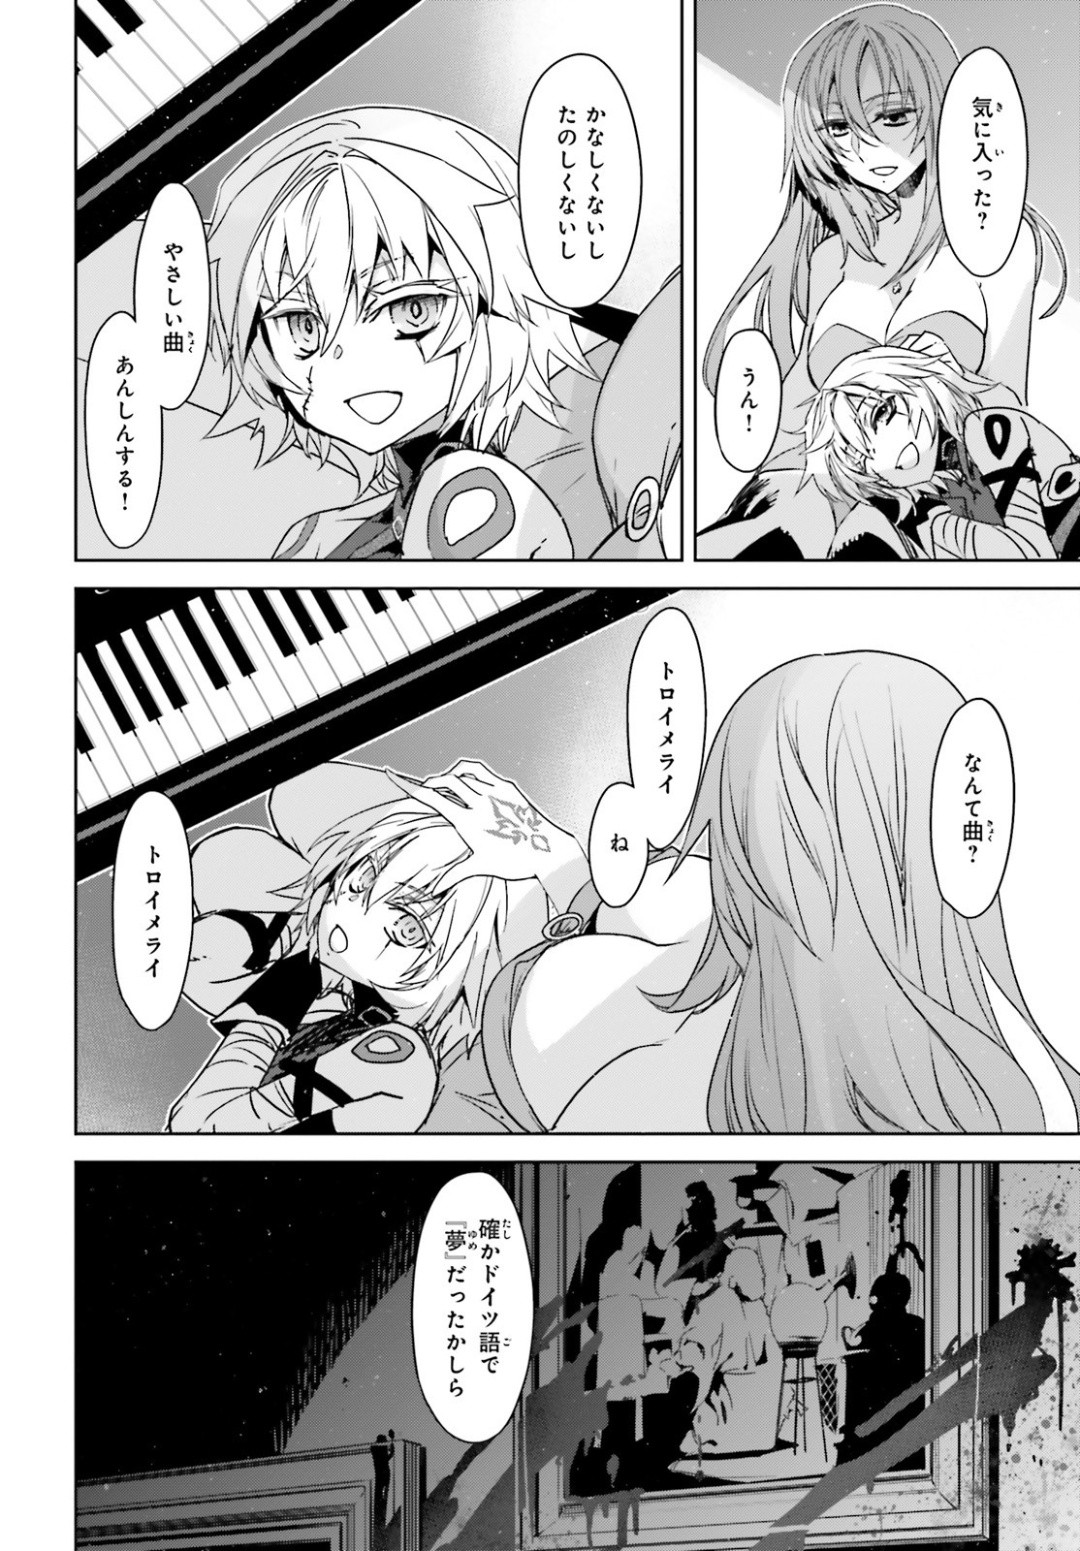 Fate-Apocrypha - Chapter 39 - Page 22